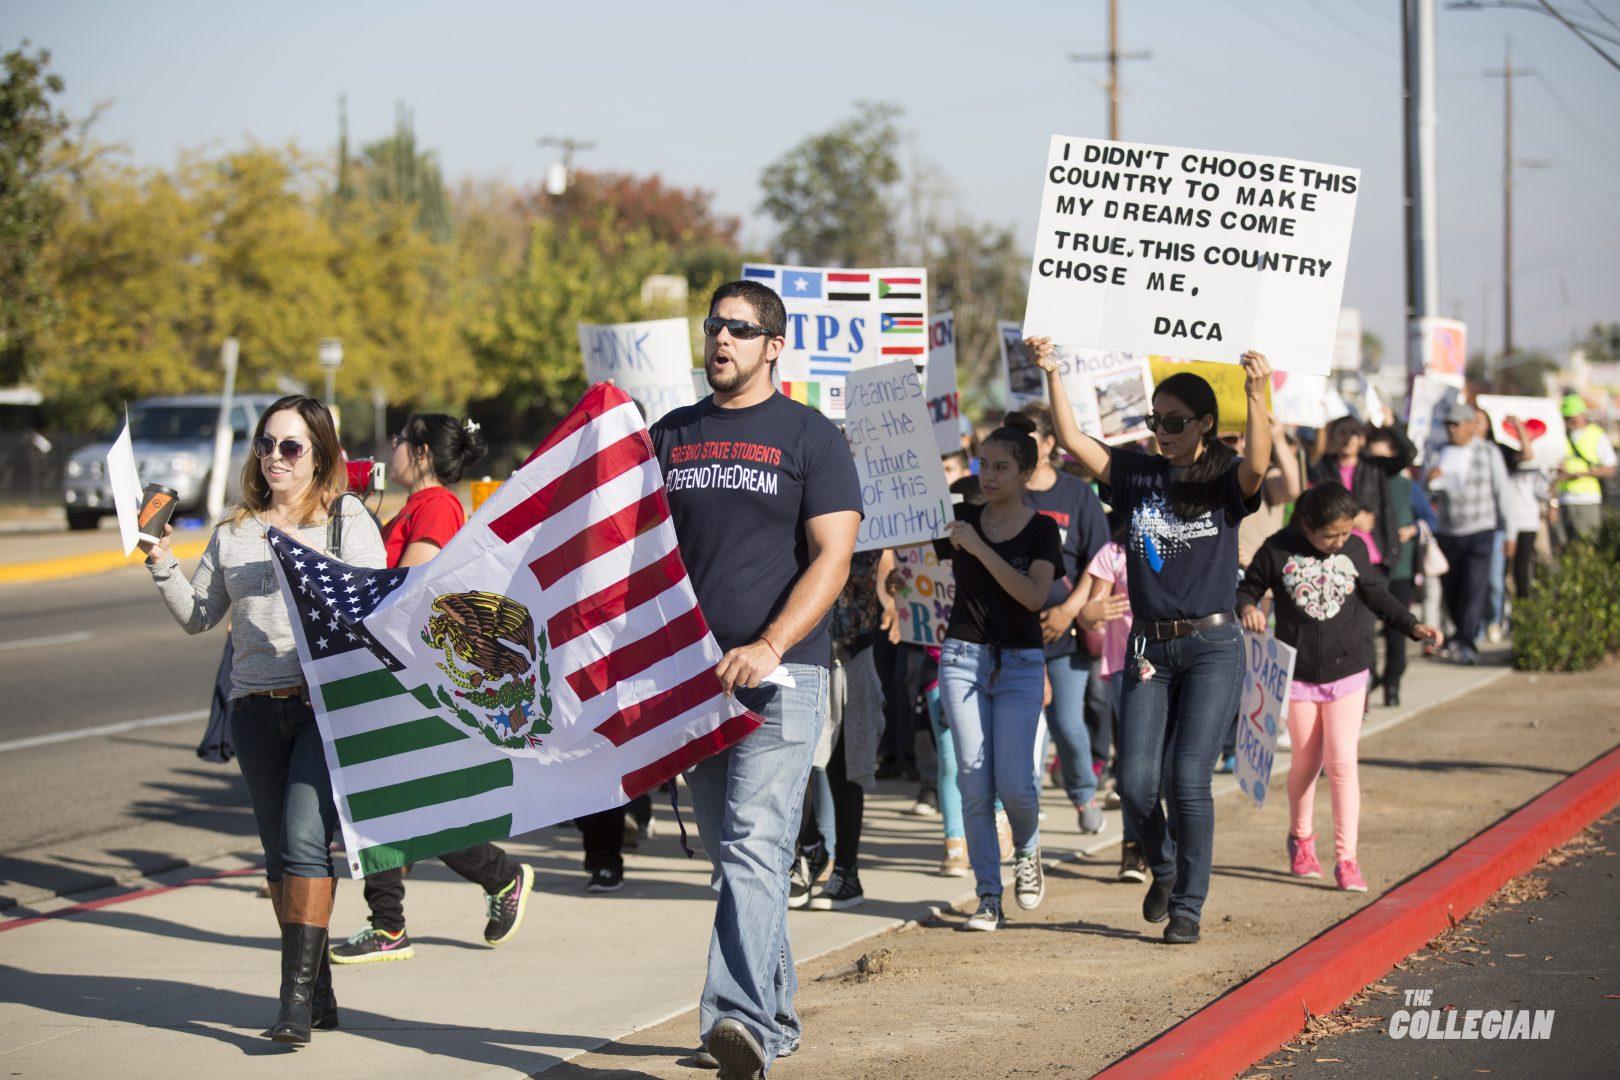 PHOTOS%3A+Students+take+to+the+street+to+demand+immigration+reform